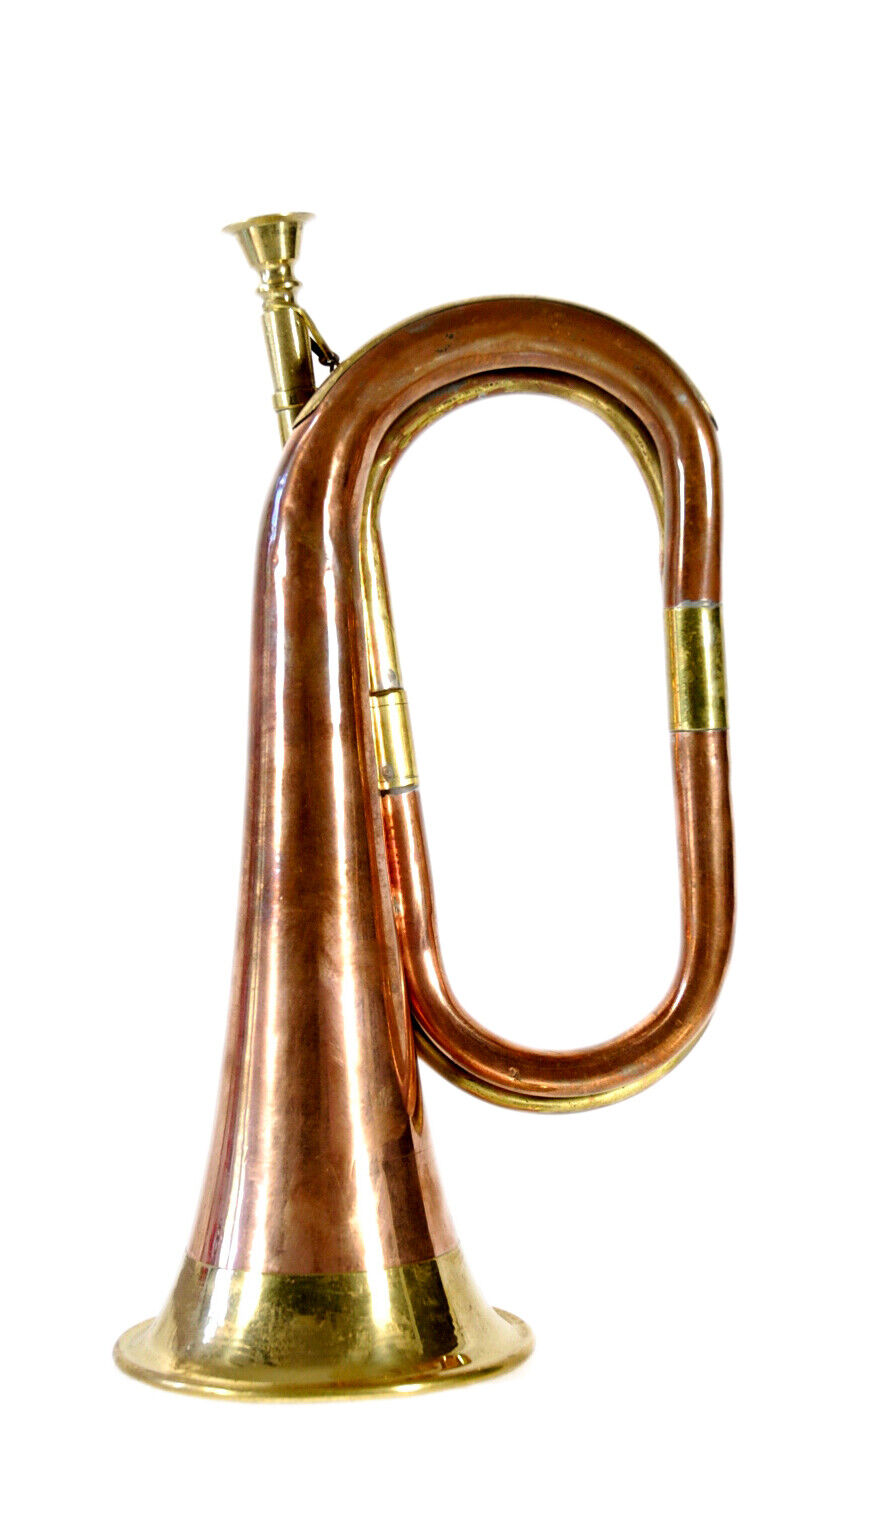 Bugle Trumpet Charm Music Band cheap Horn 11in Copper New York Mall Large Army Vinta